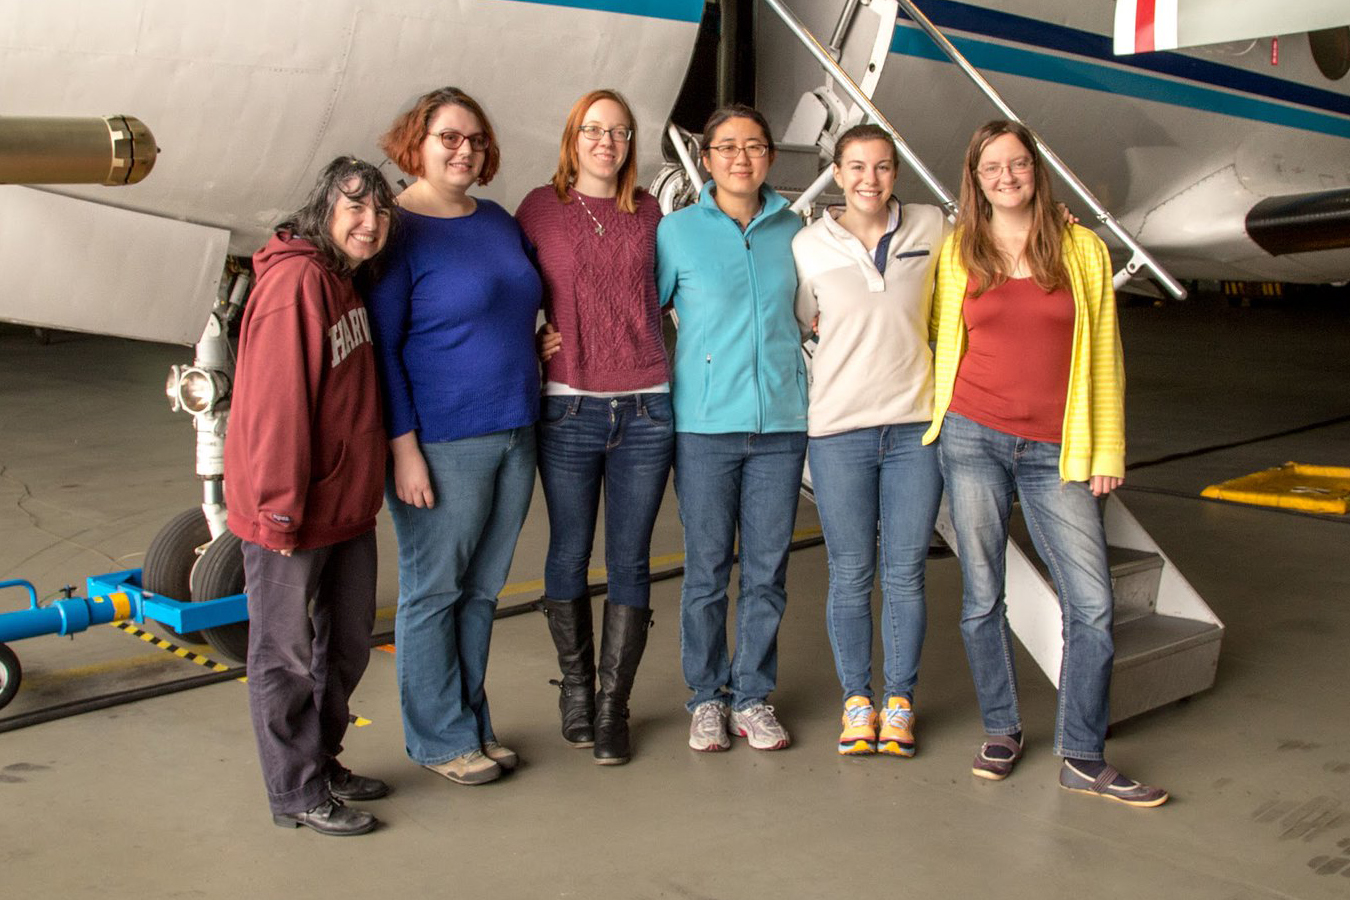 Amy Sullivan, Maria Zawadowicz, Alyssa Matthews, Fan Mei, Lexie Goldberger, and Susanne Glienke stand together in front of the stairs to the Gulfstream-159 (G-1) research aircraft.